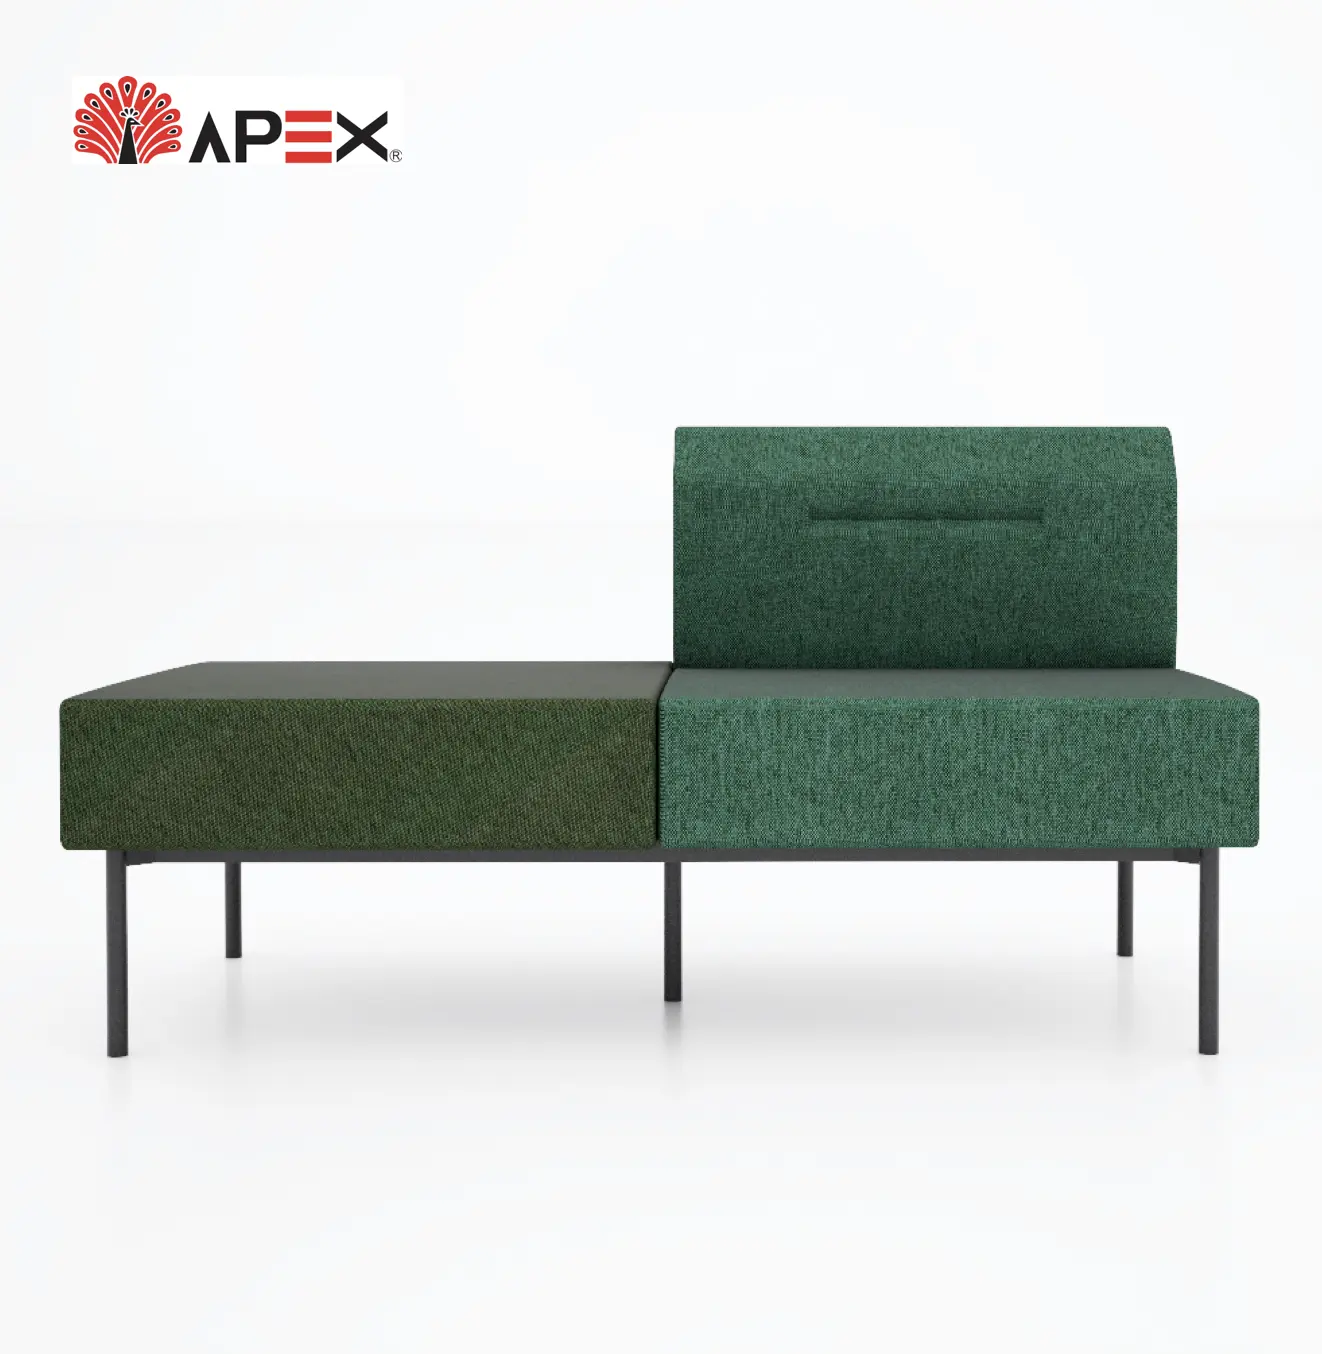 2021 Business Office Sofa Modern High Quality Fabric Full Cover Set for Waiting Area Reception Public Area